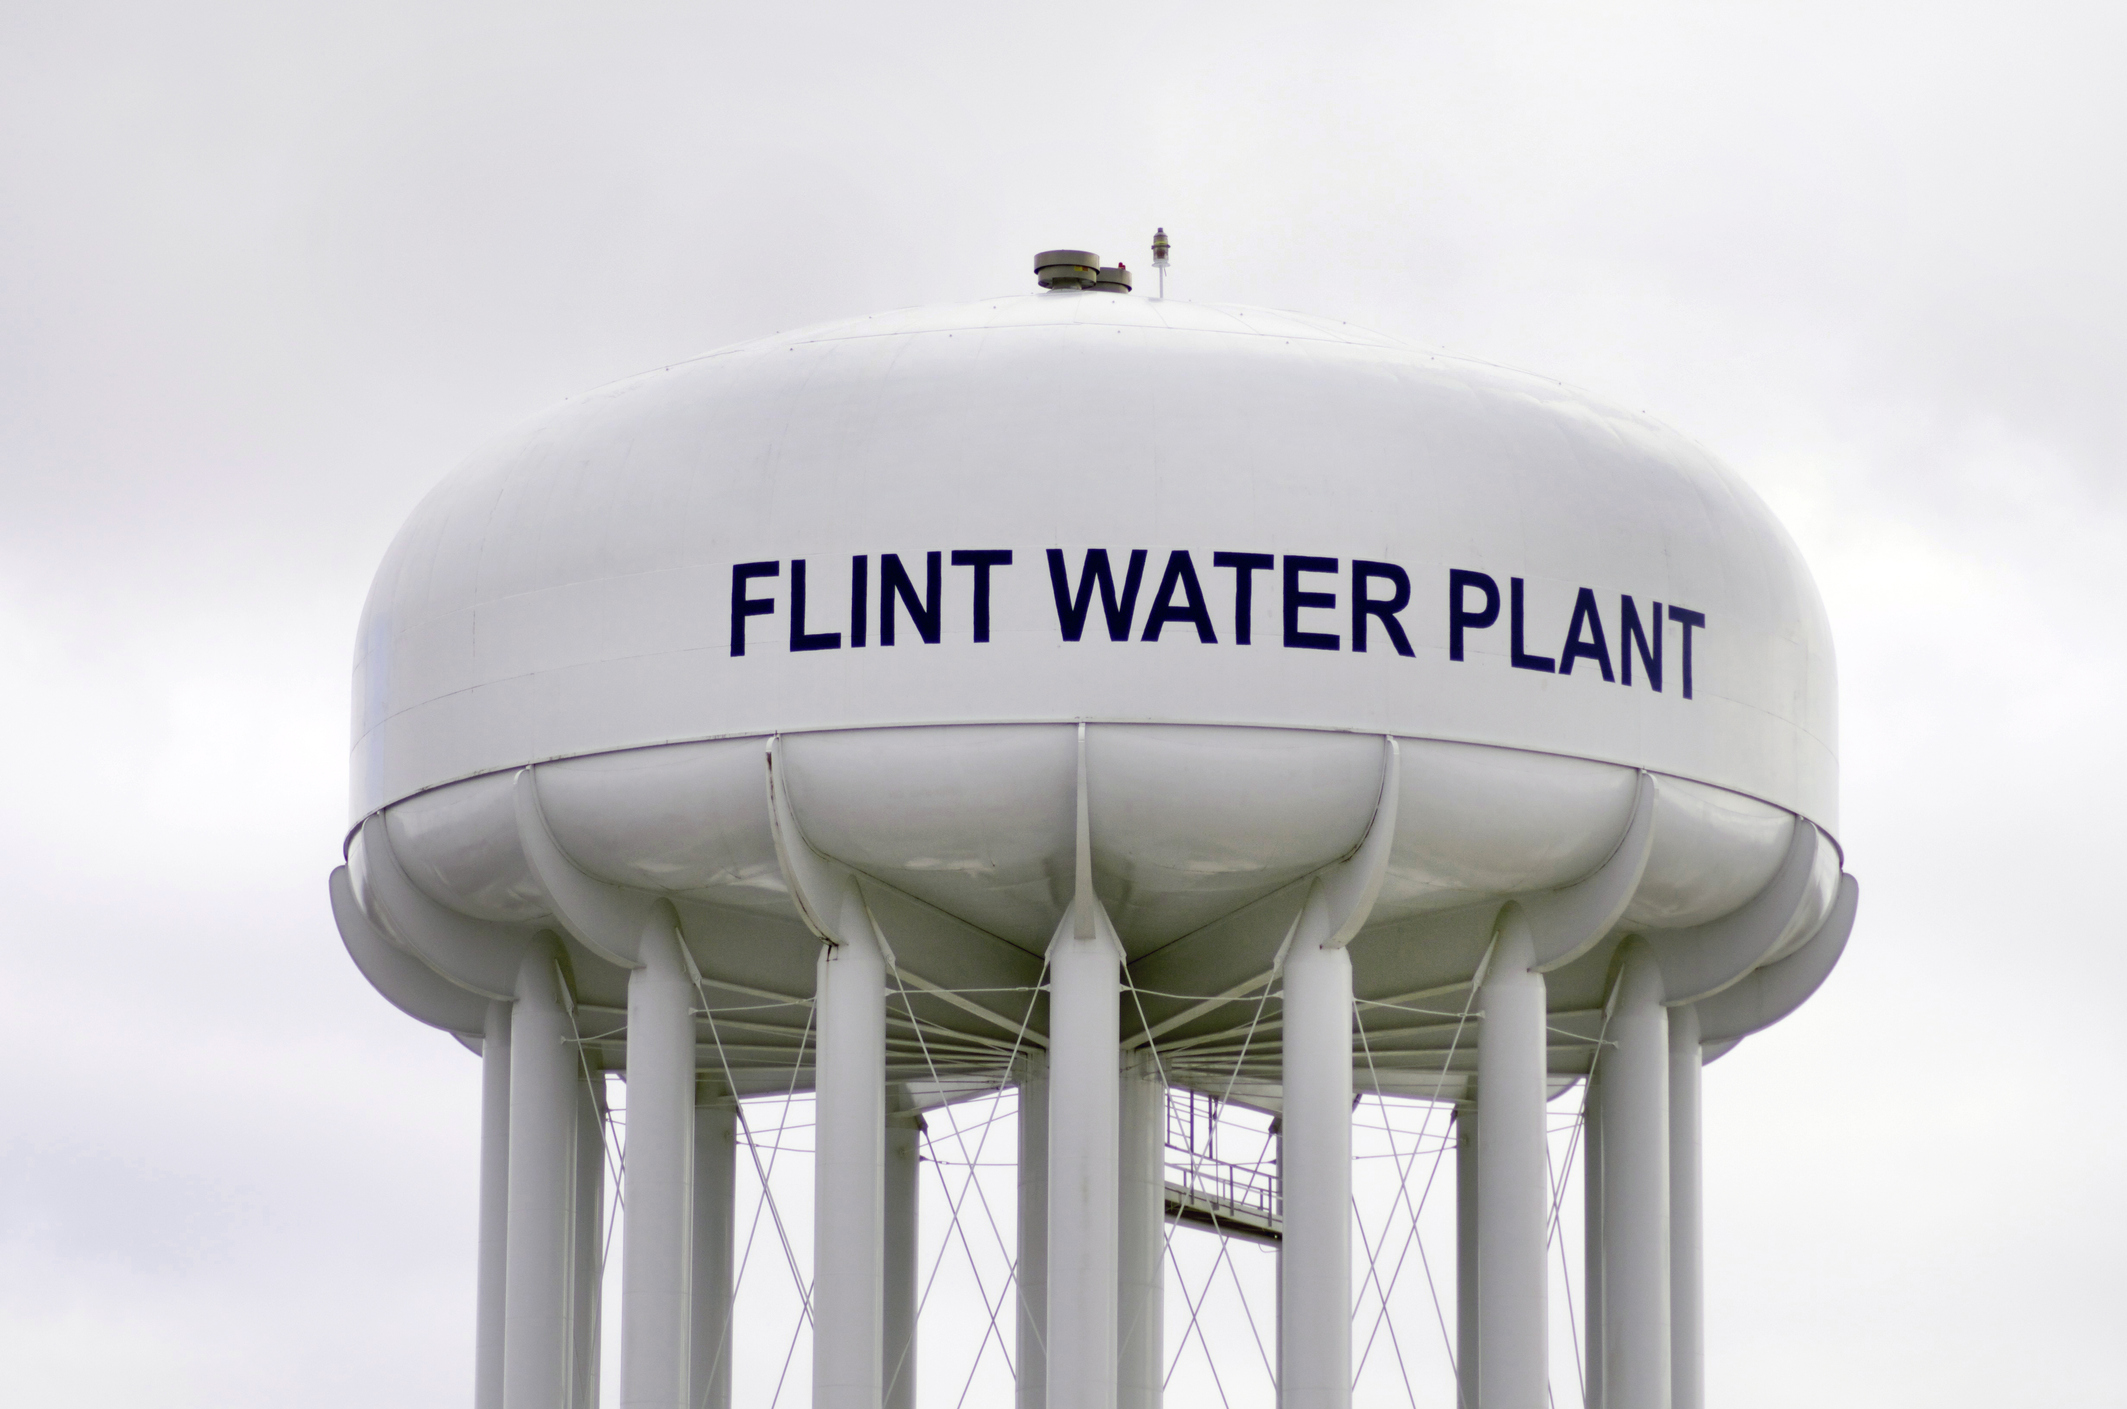 Photo of a large white water tower in Flint, Michigan with the text Flint Water Plant painted in black letters.